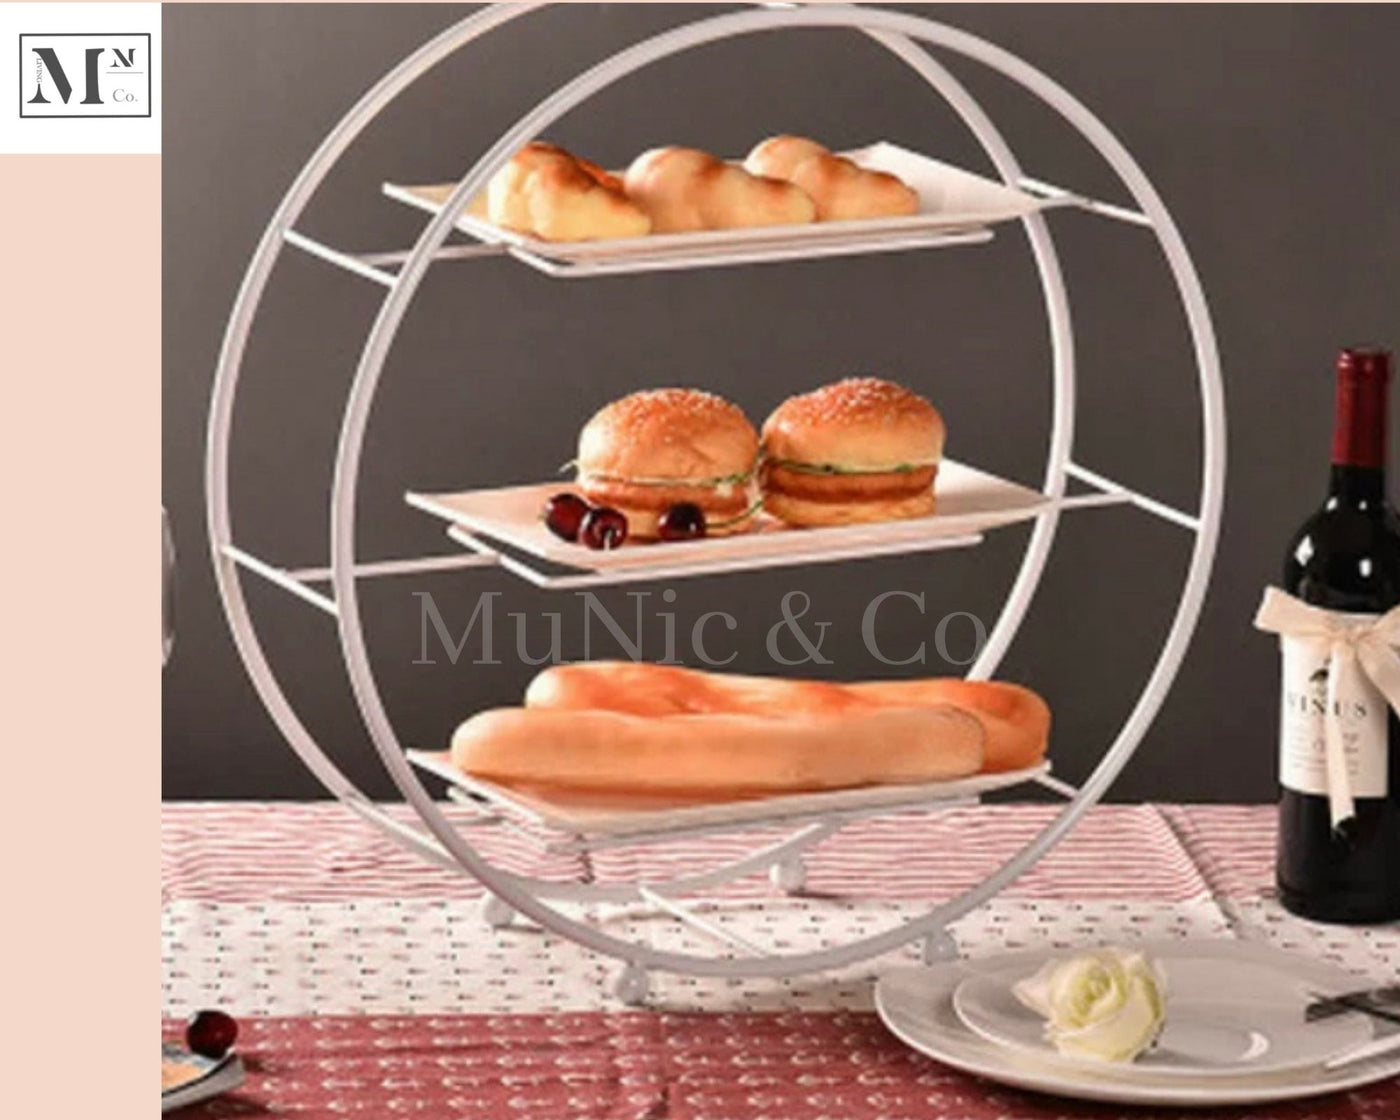 high tea display set.  deliver in 12 days. cakes and pastry display